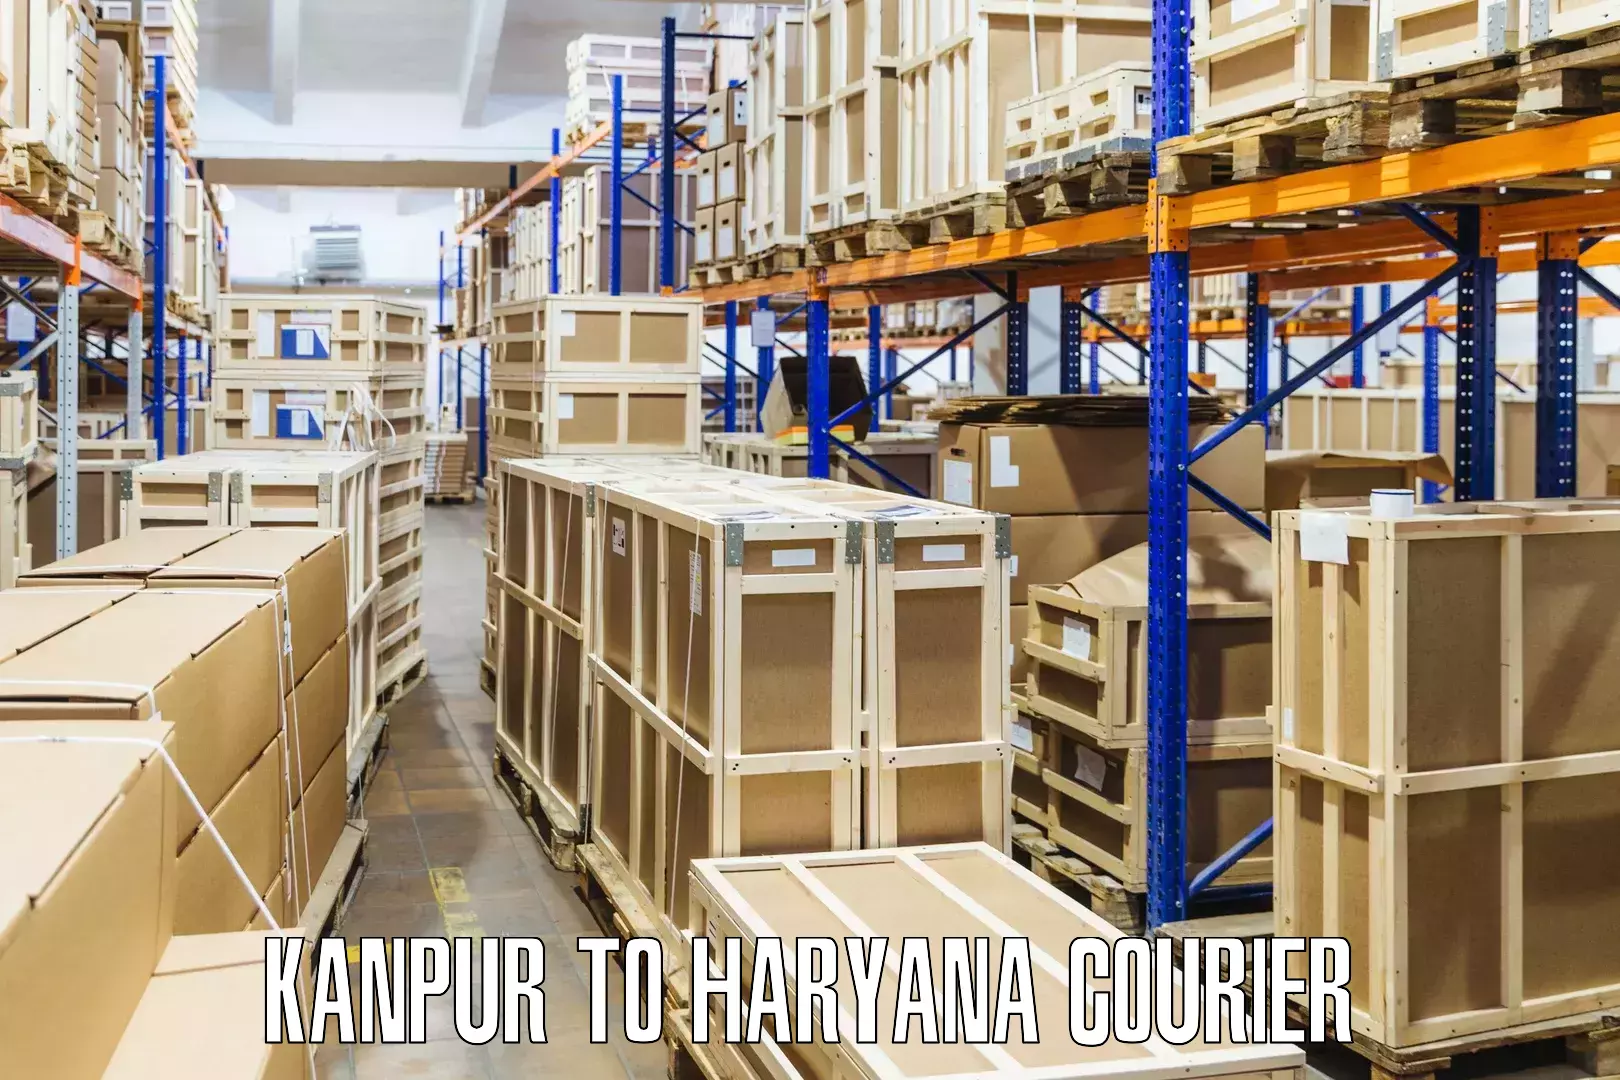 Courier service booking Kanpur to Hansi